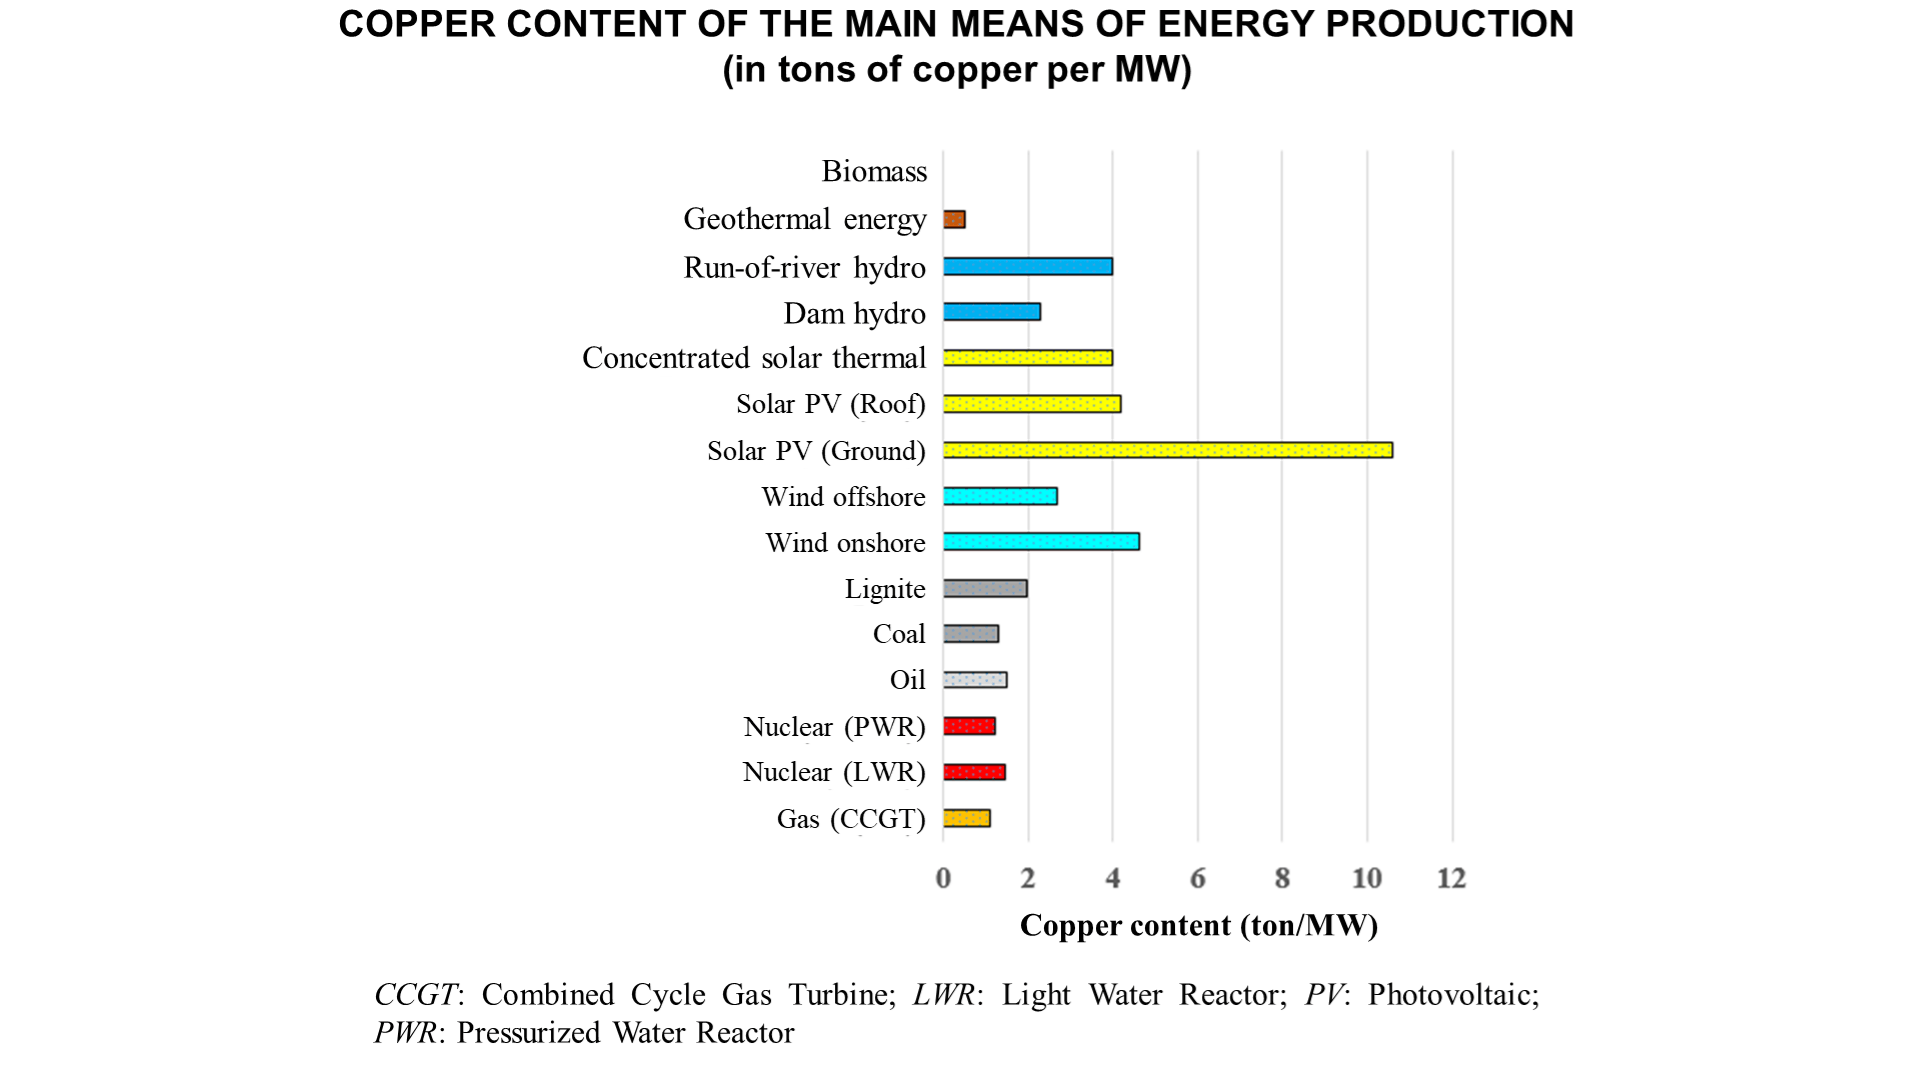 content copper of the main mean of energy production